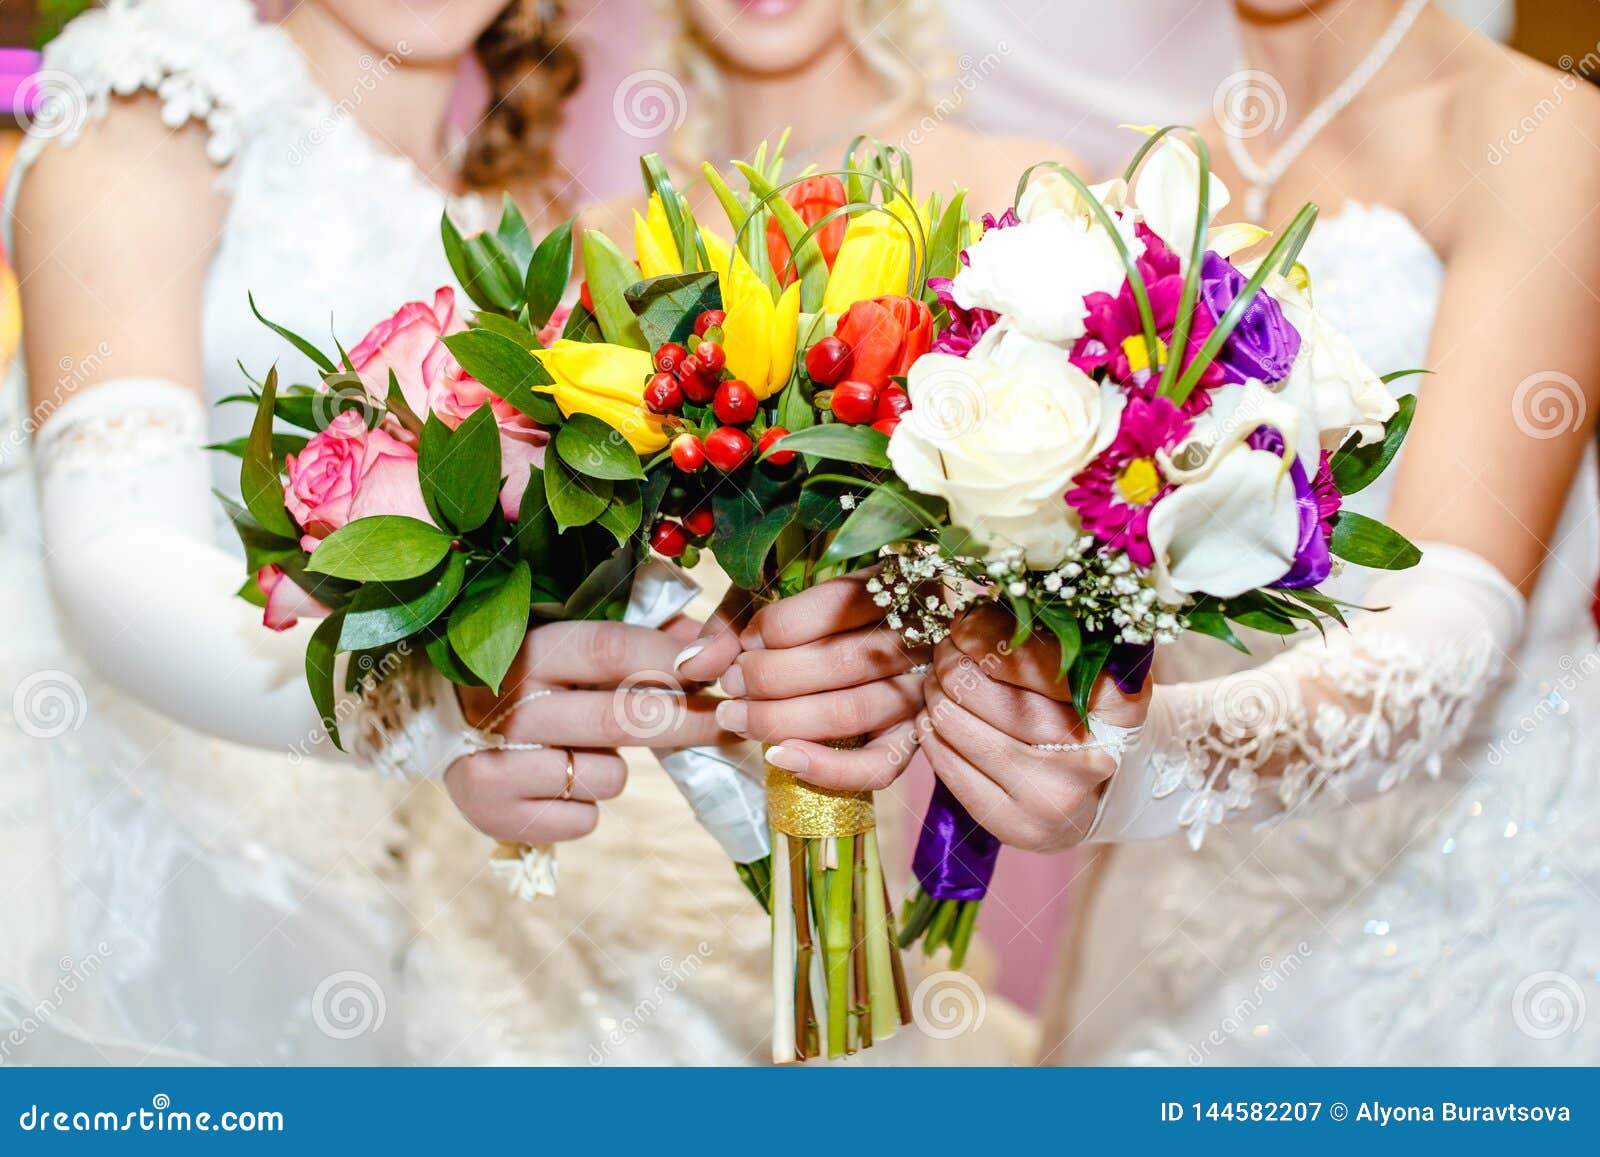 Bride holding bouquets stock image. Image of background - 144582207